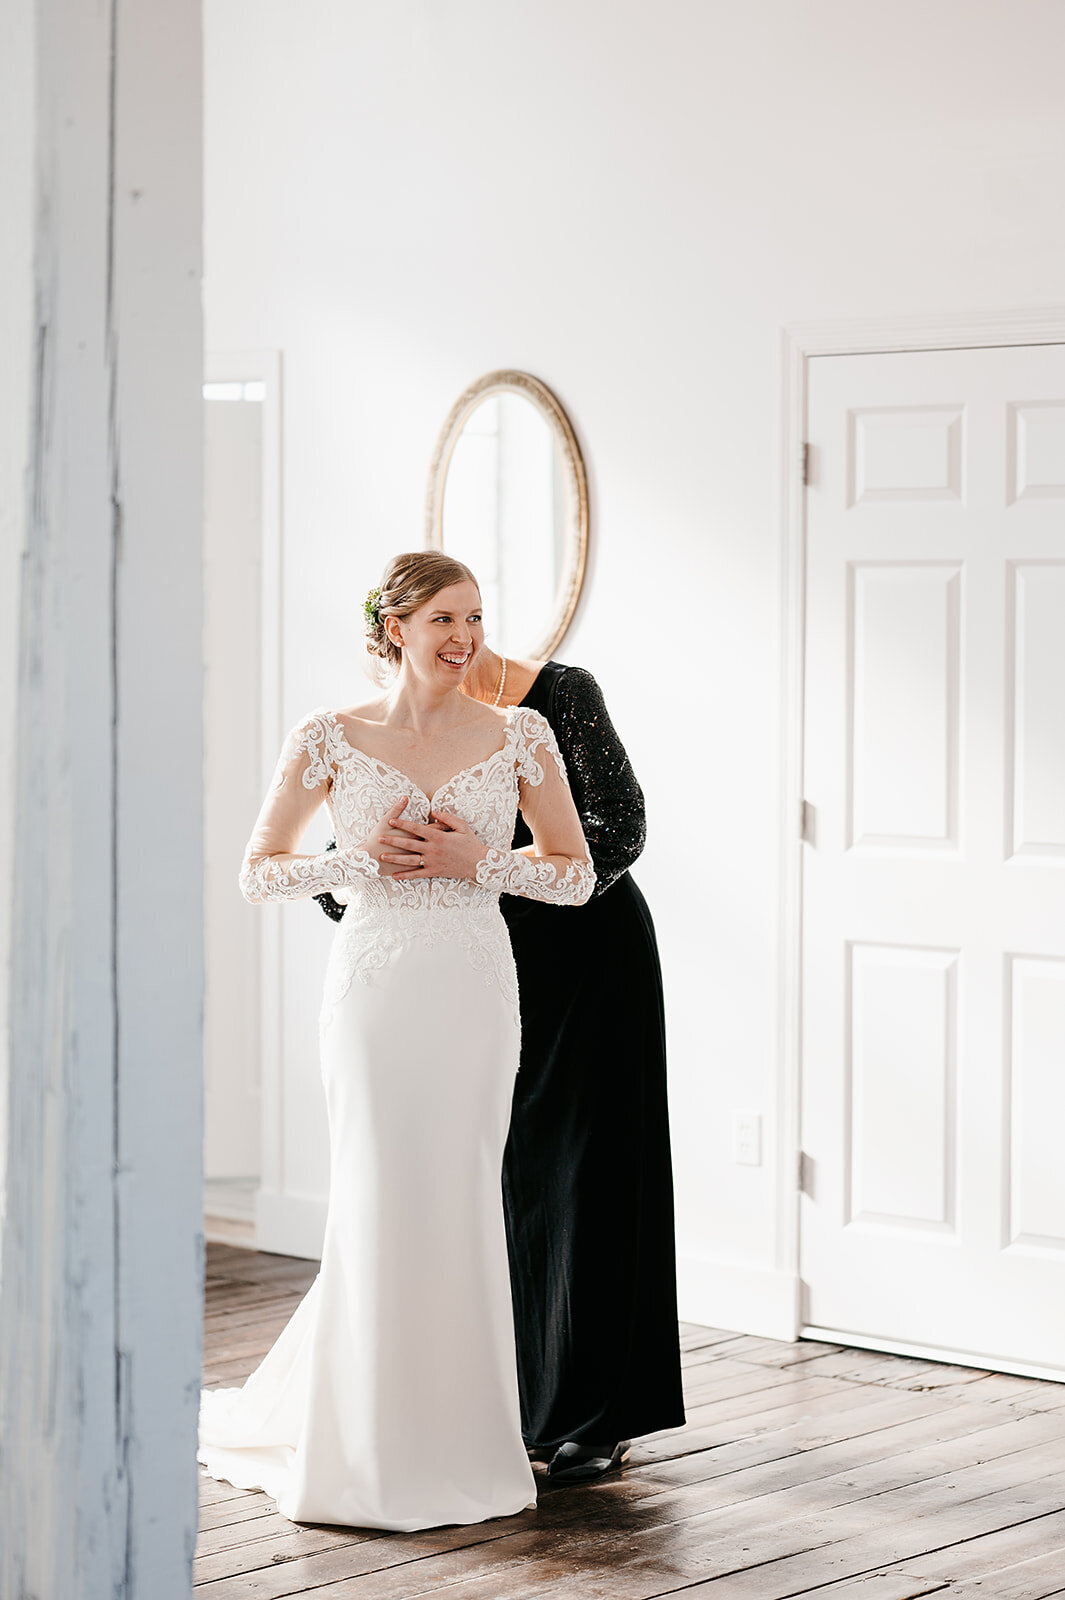 Mom helps bride get into dress in bridal suite and Norther Pacific Center in Northern Minnesota